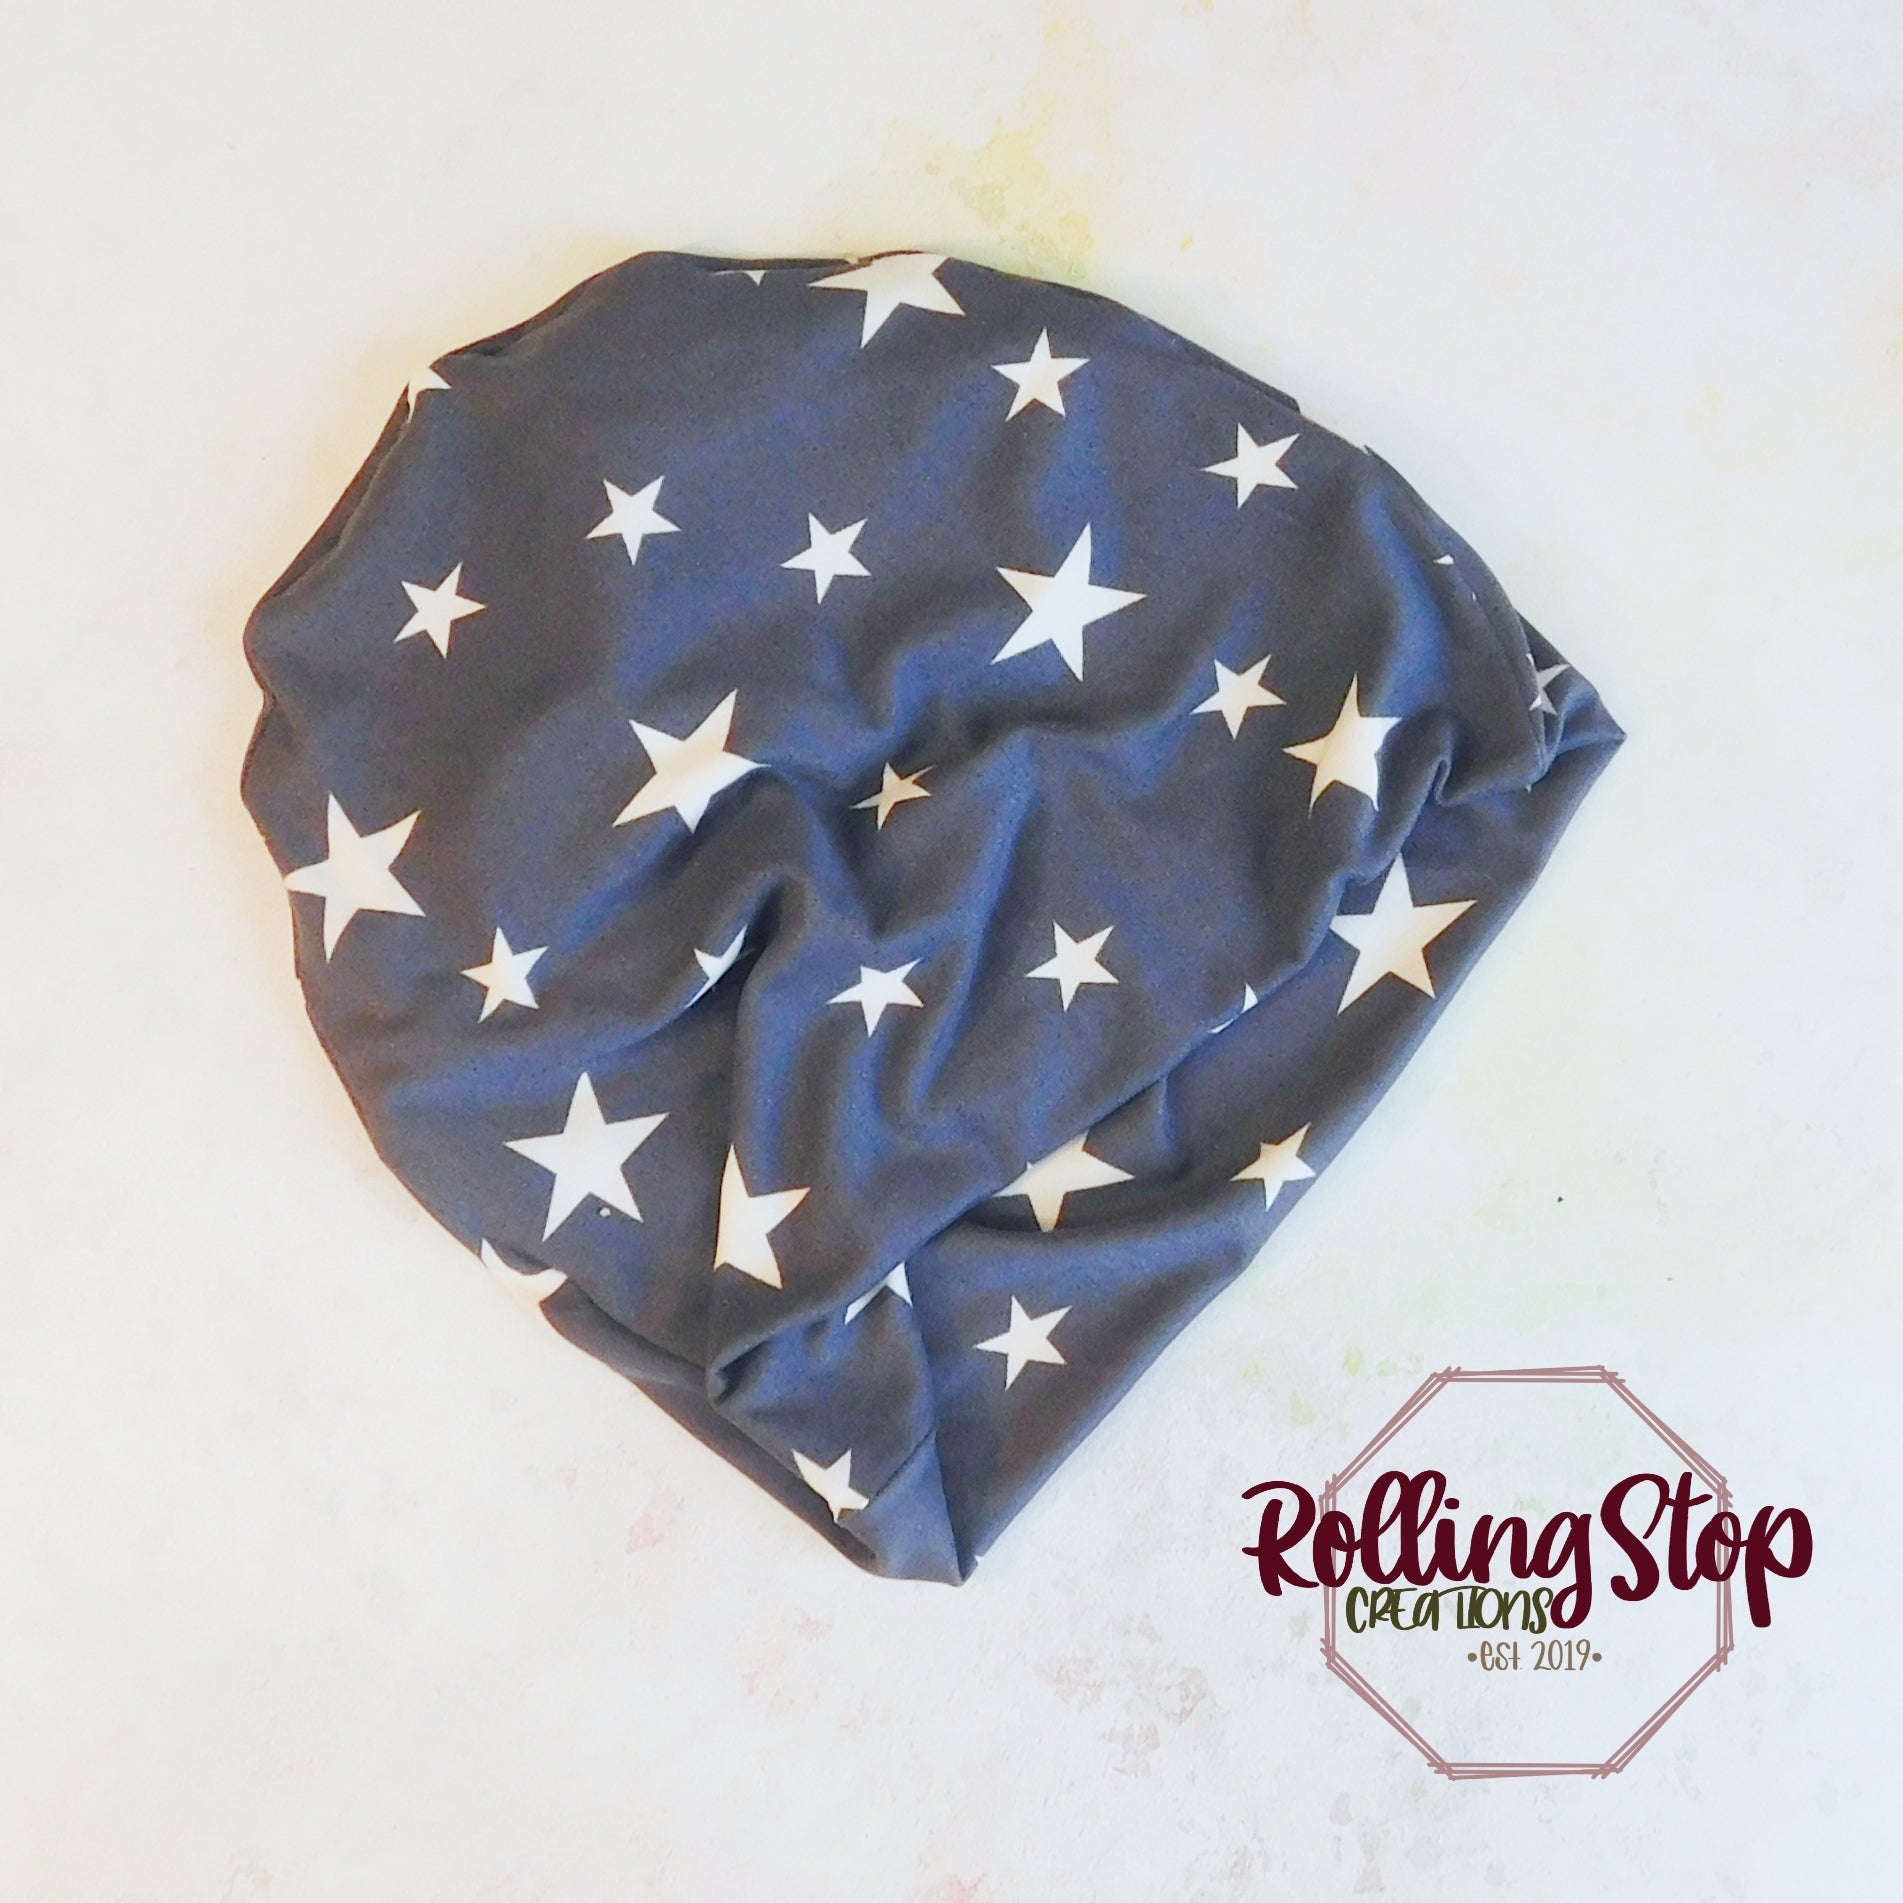 Slouchy Beanies by Rolling Stop Creations sold by Rolling Stop Creations Accessories - Athletic - Boutique - Comfy Clot